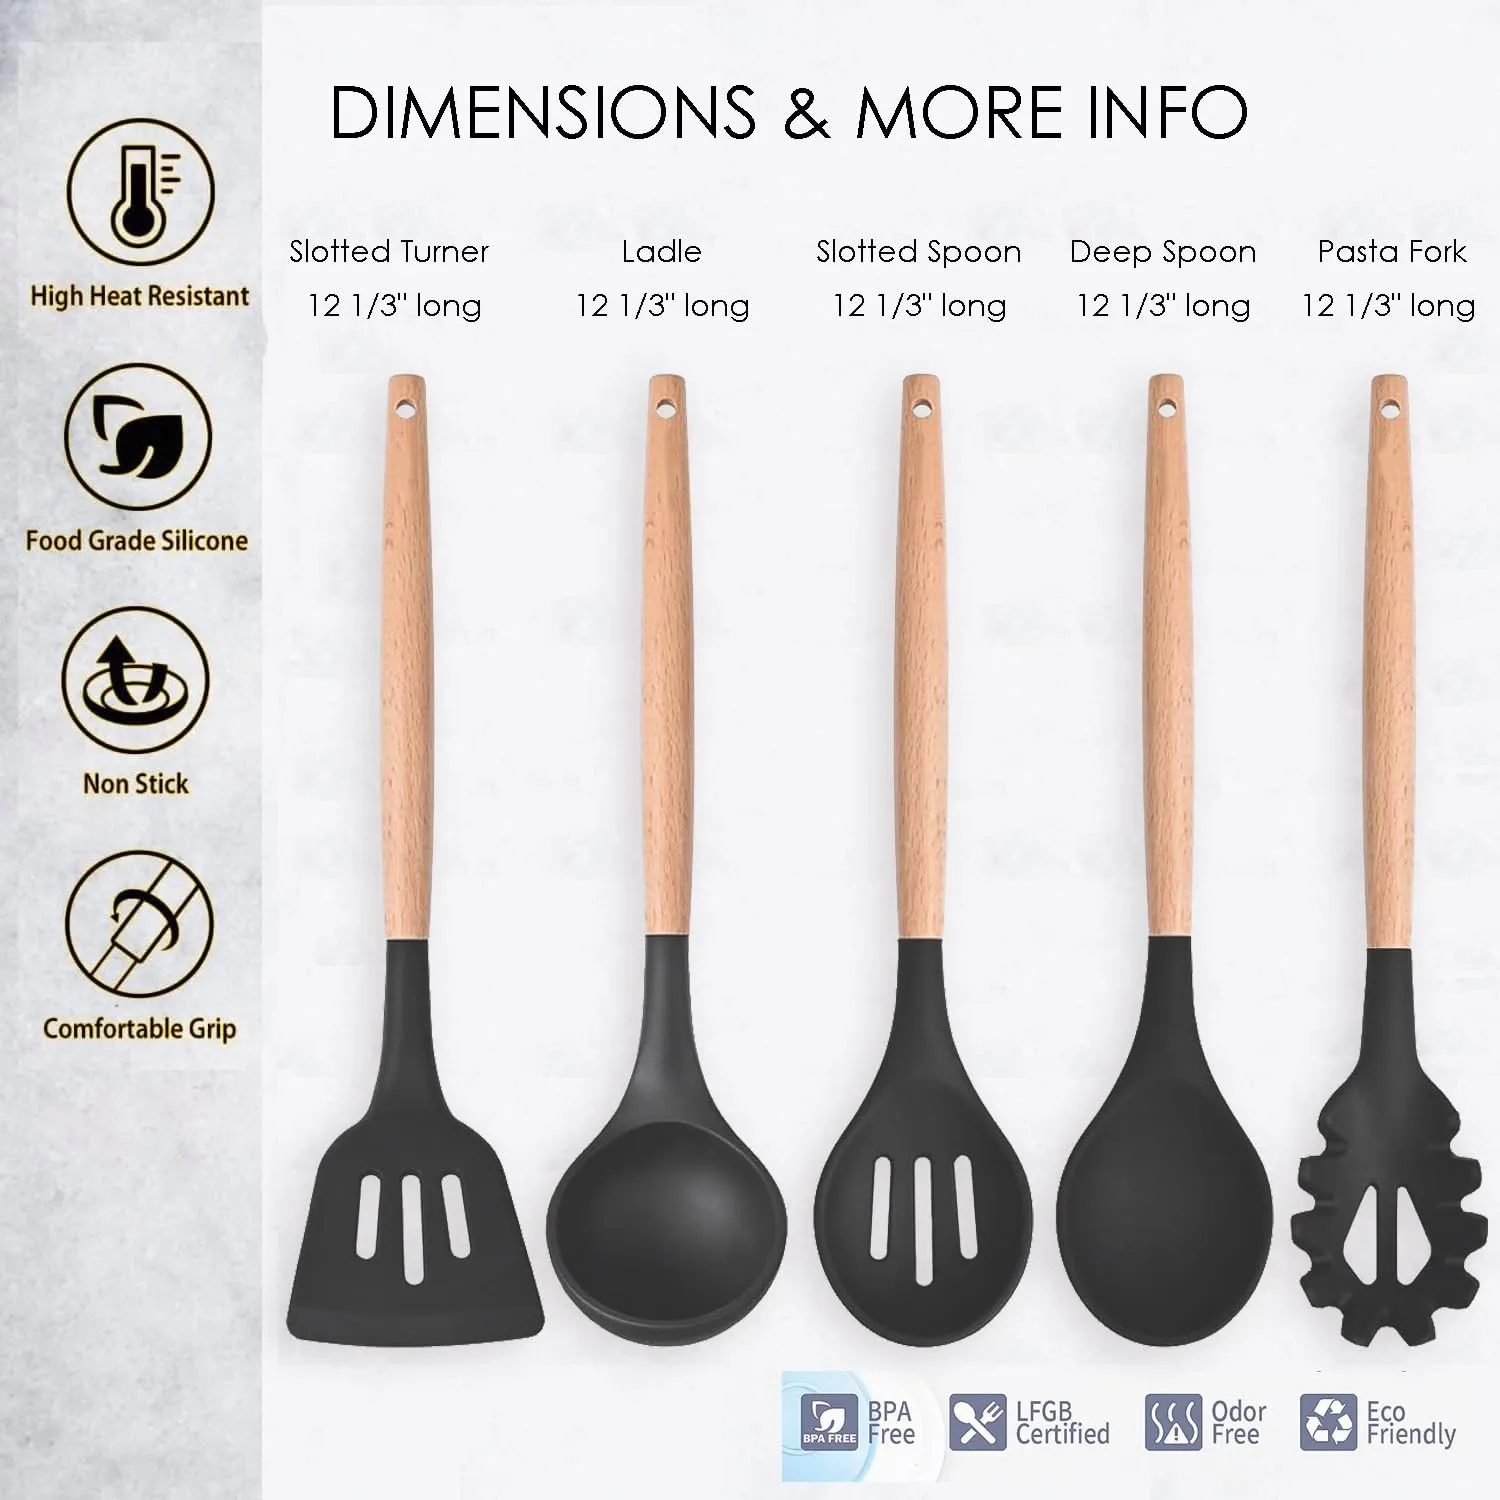 Nonstick 5 Pcs Non toxic high-temperature Heat-resistant Customization Easy to clean SIlicone utensils set